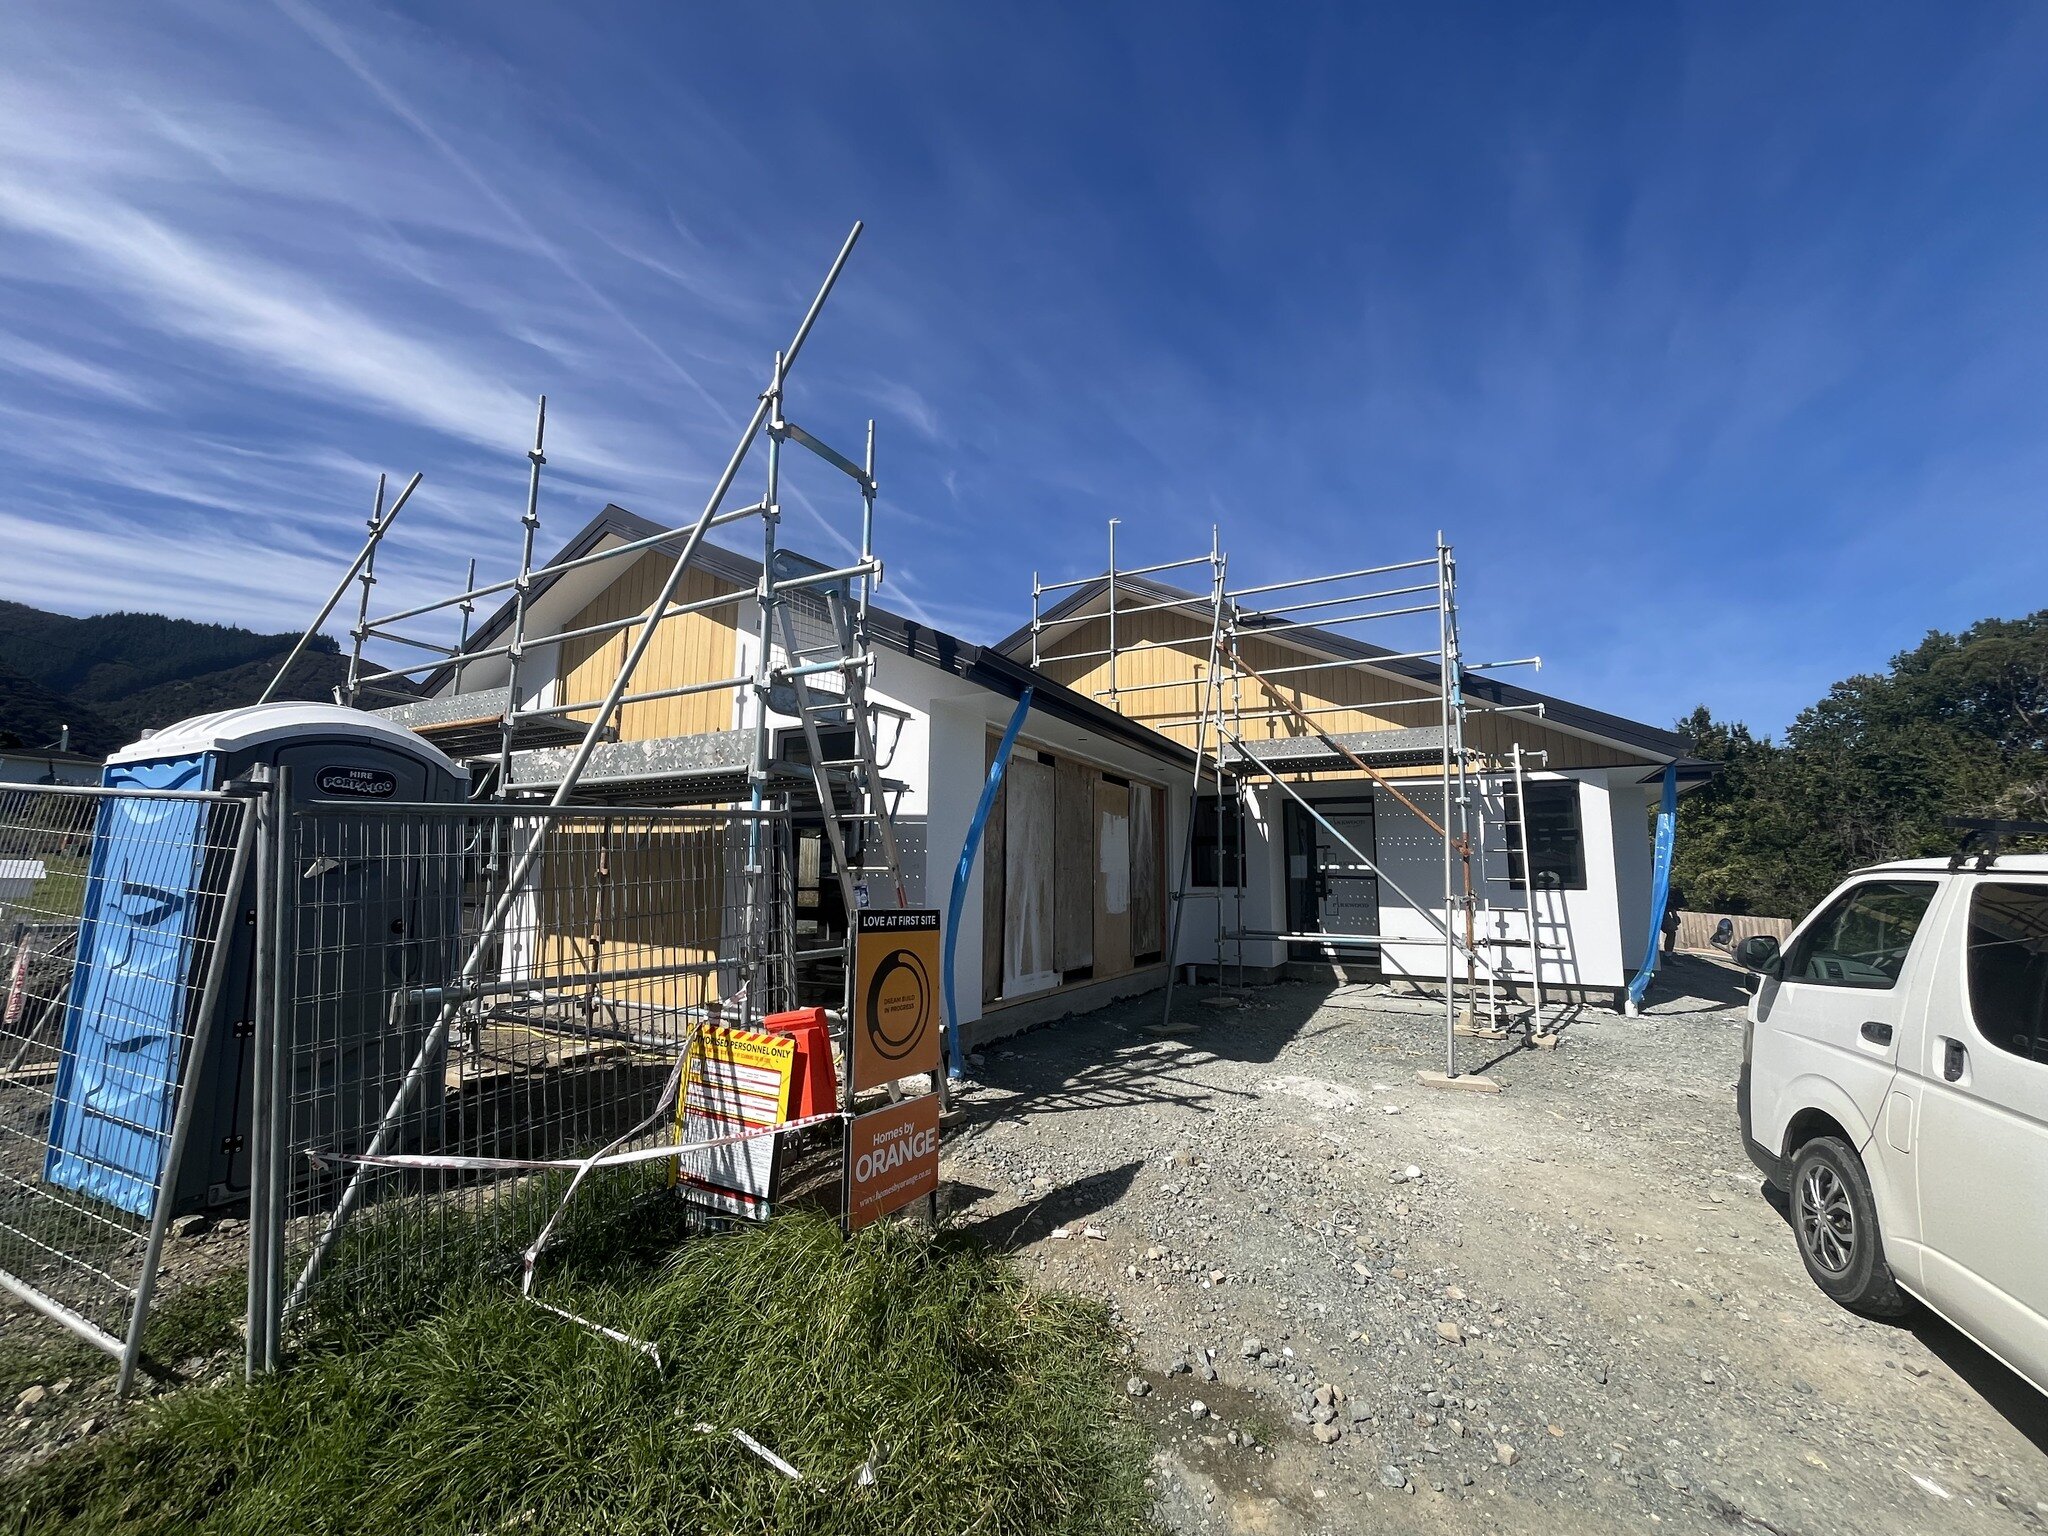 The Halligan build is coming along nicely. The Genia exterior timber looks great as always! We can't wait to see this one completed!